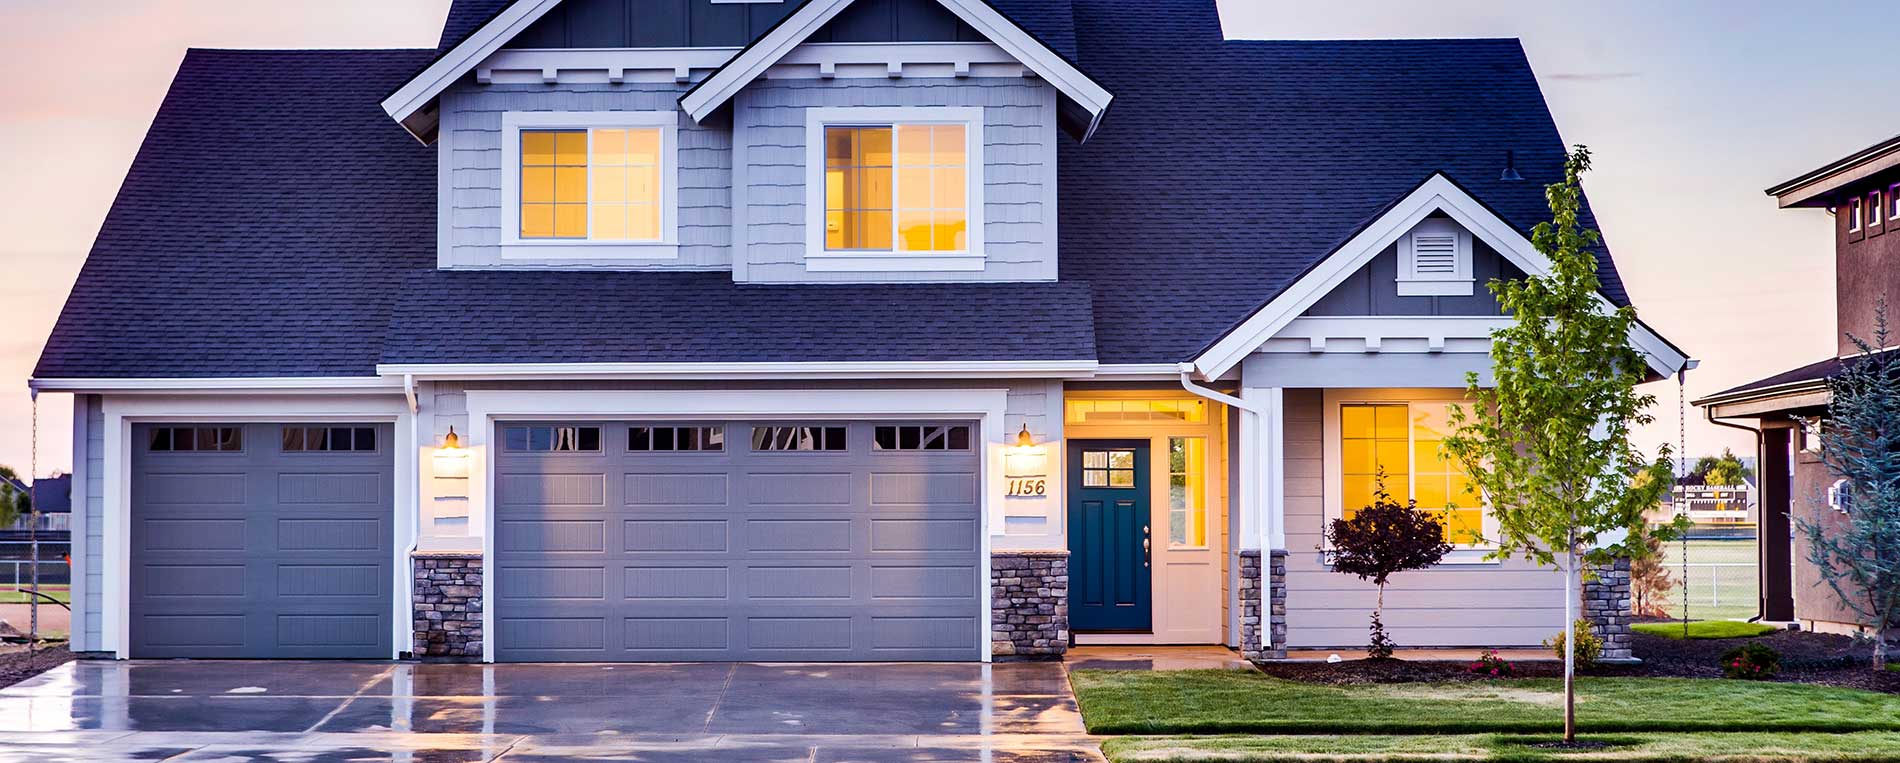 Common Questions About Garage Doors